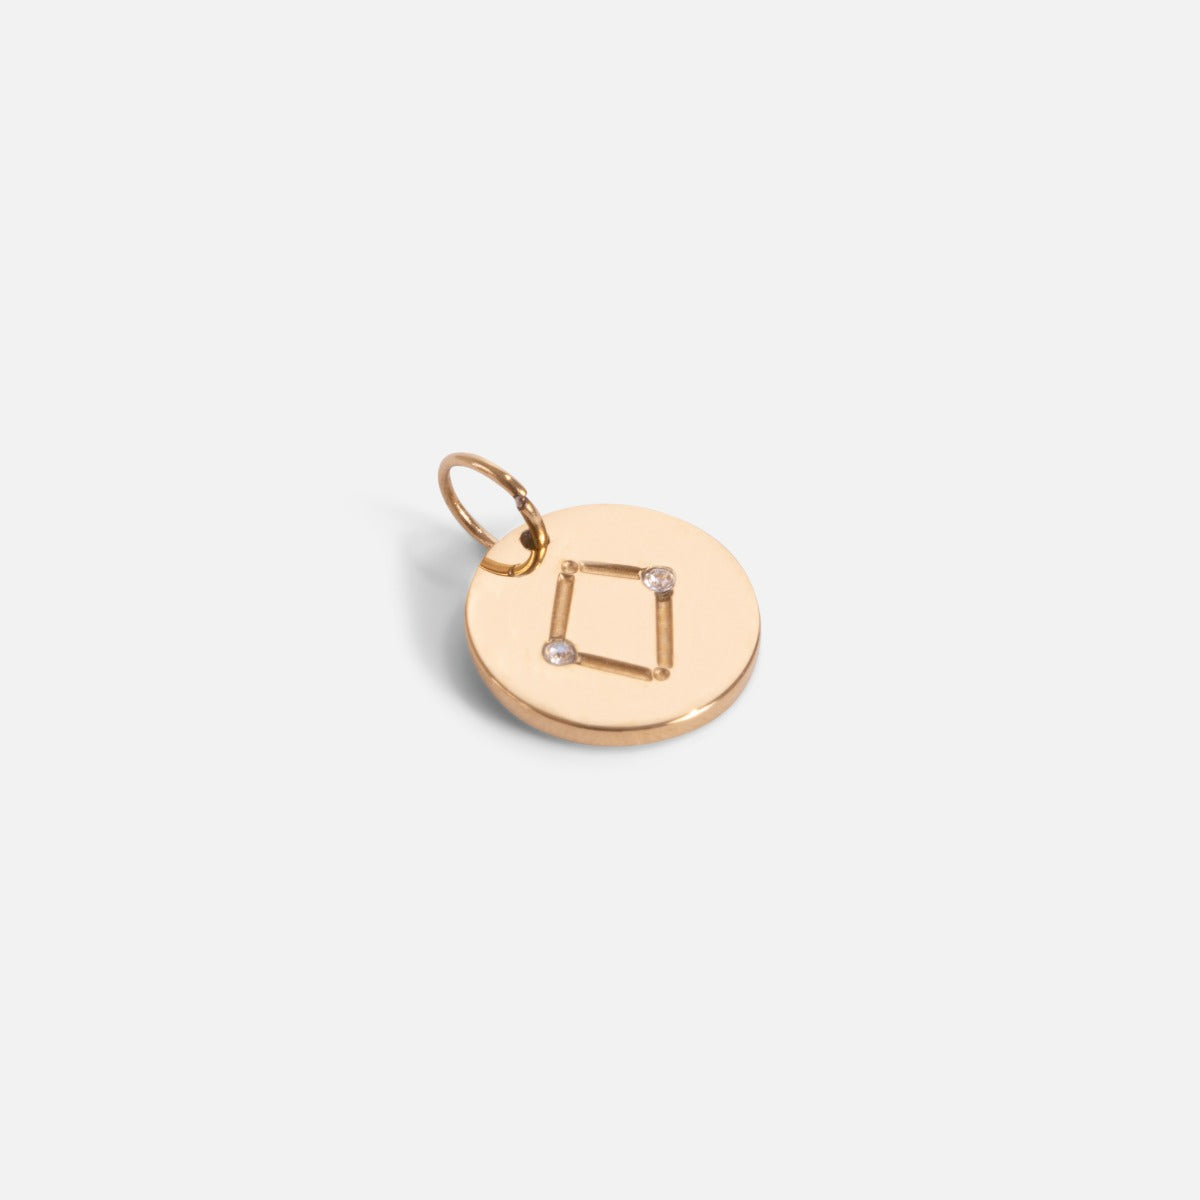 Small golden charm engraved with the zodiac constellation "libra"